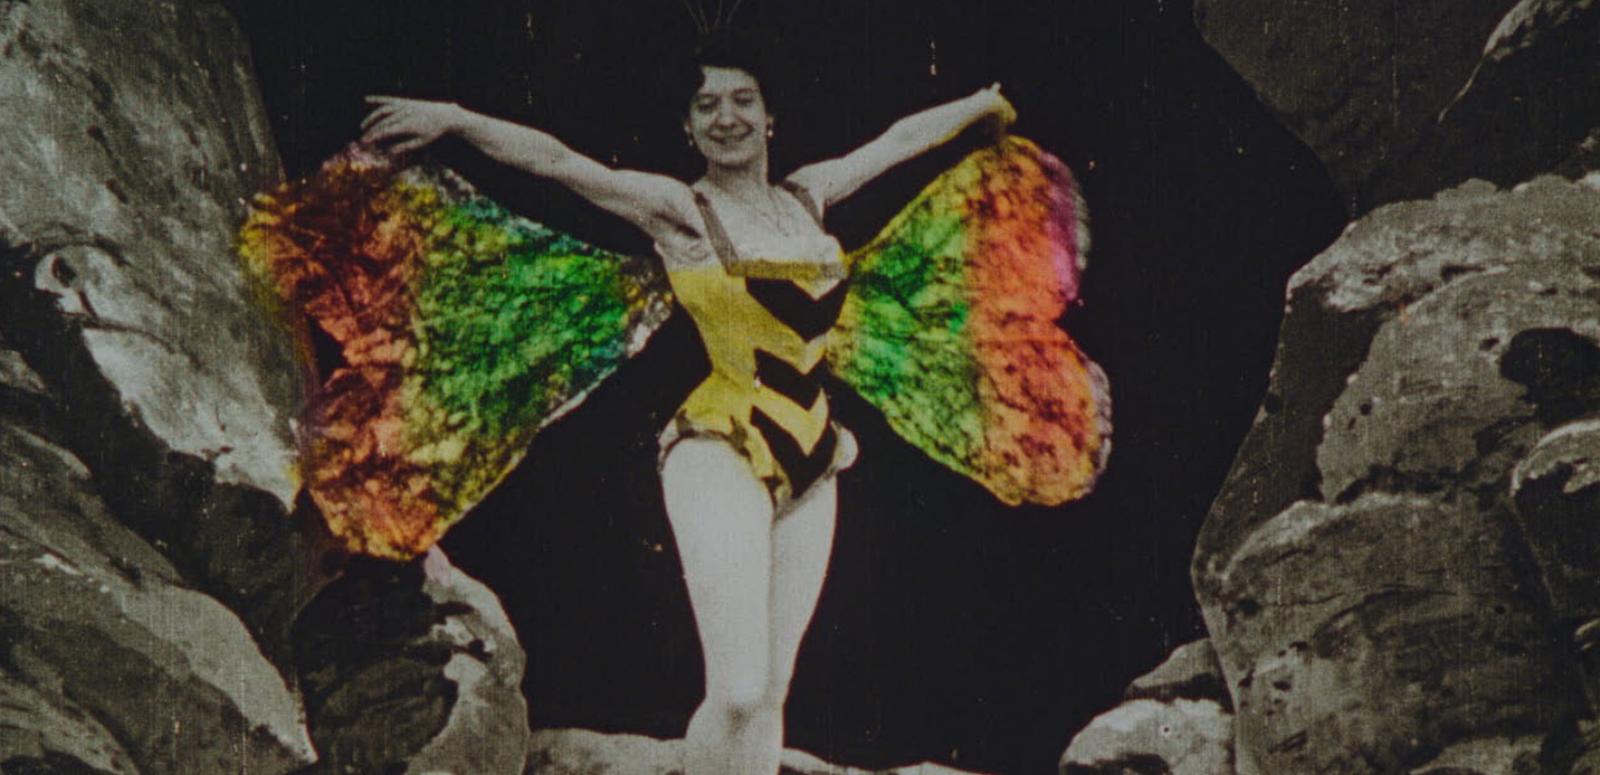 Handcoloured image of  woman wearing a yellow dancer's costume and colourful butterfly wings